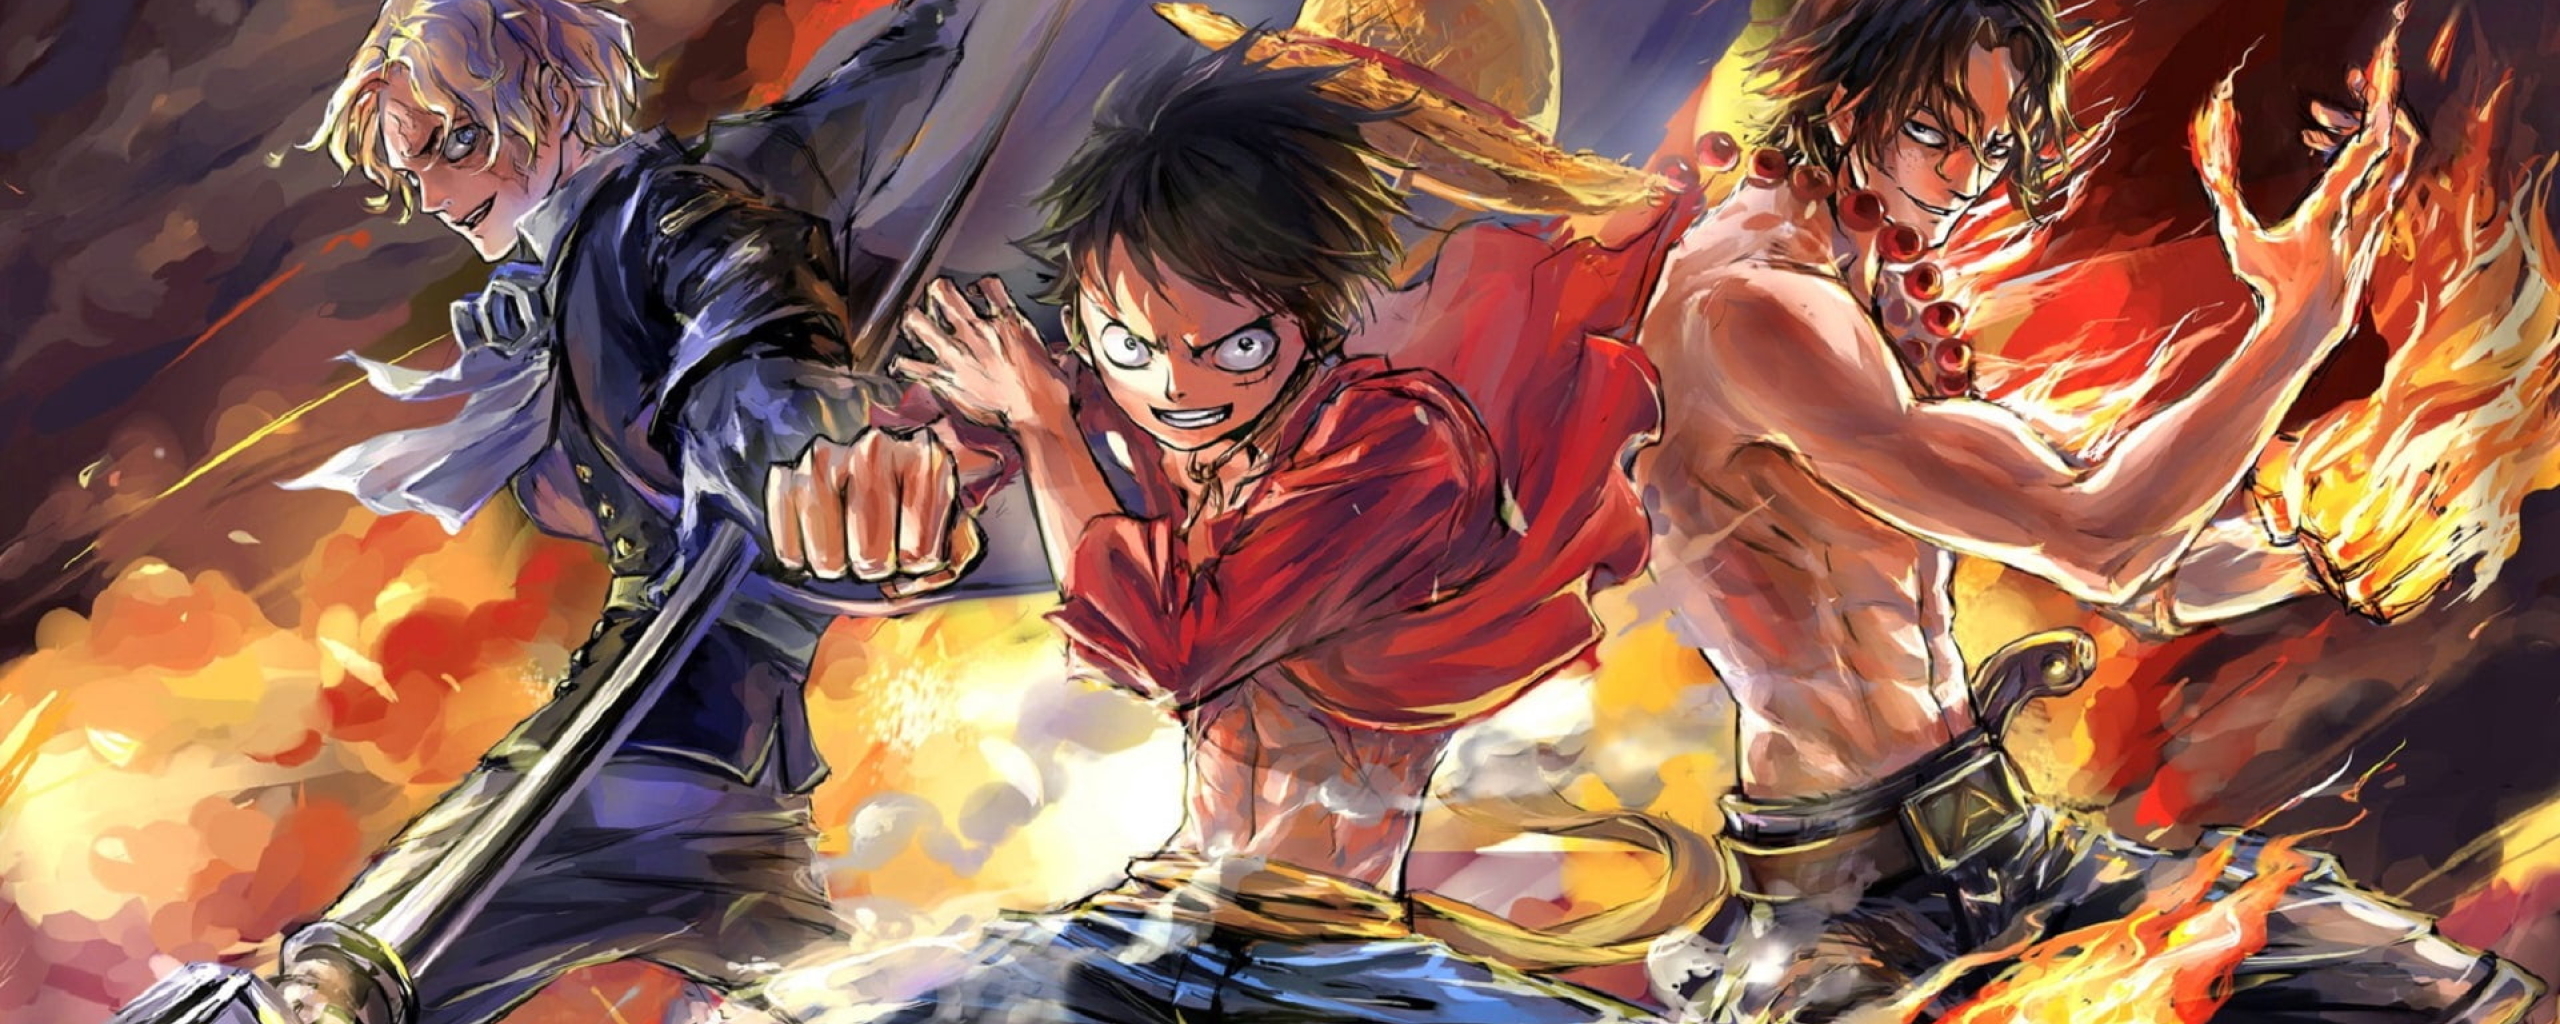 2560x1024 Luffy Ace And Sabo One Piece Team 2560x1024 Resolution Wallpaper Hd Anime 4k Wallpapers Images Photos And Background Wallpapers Den